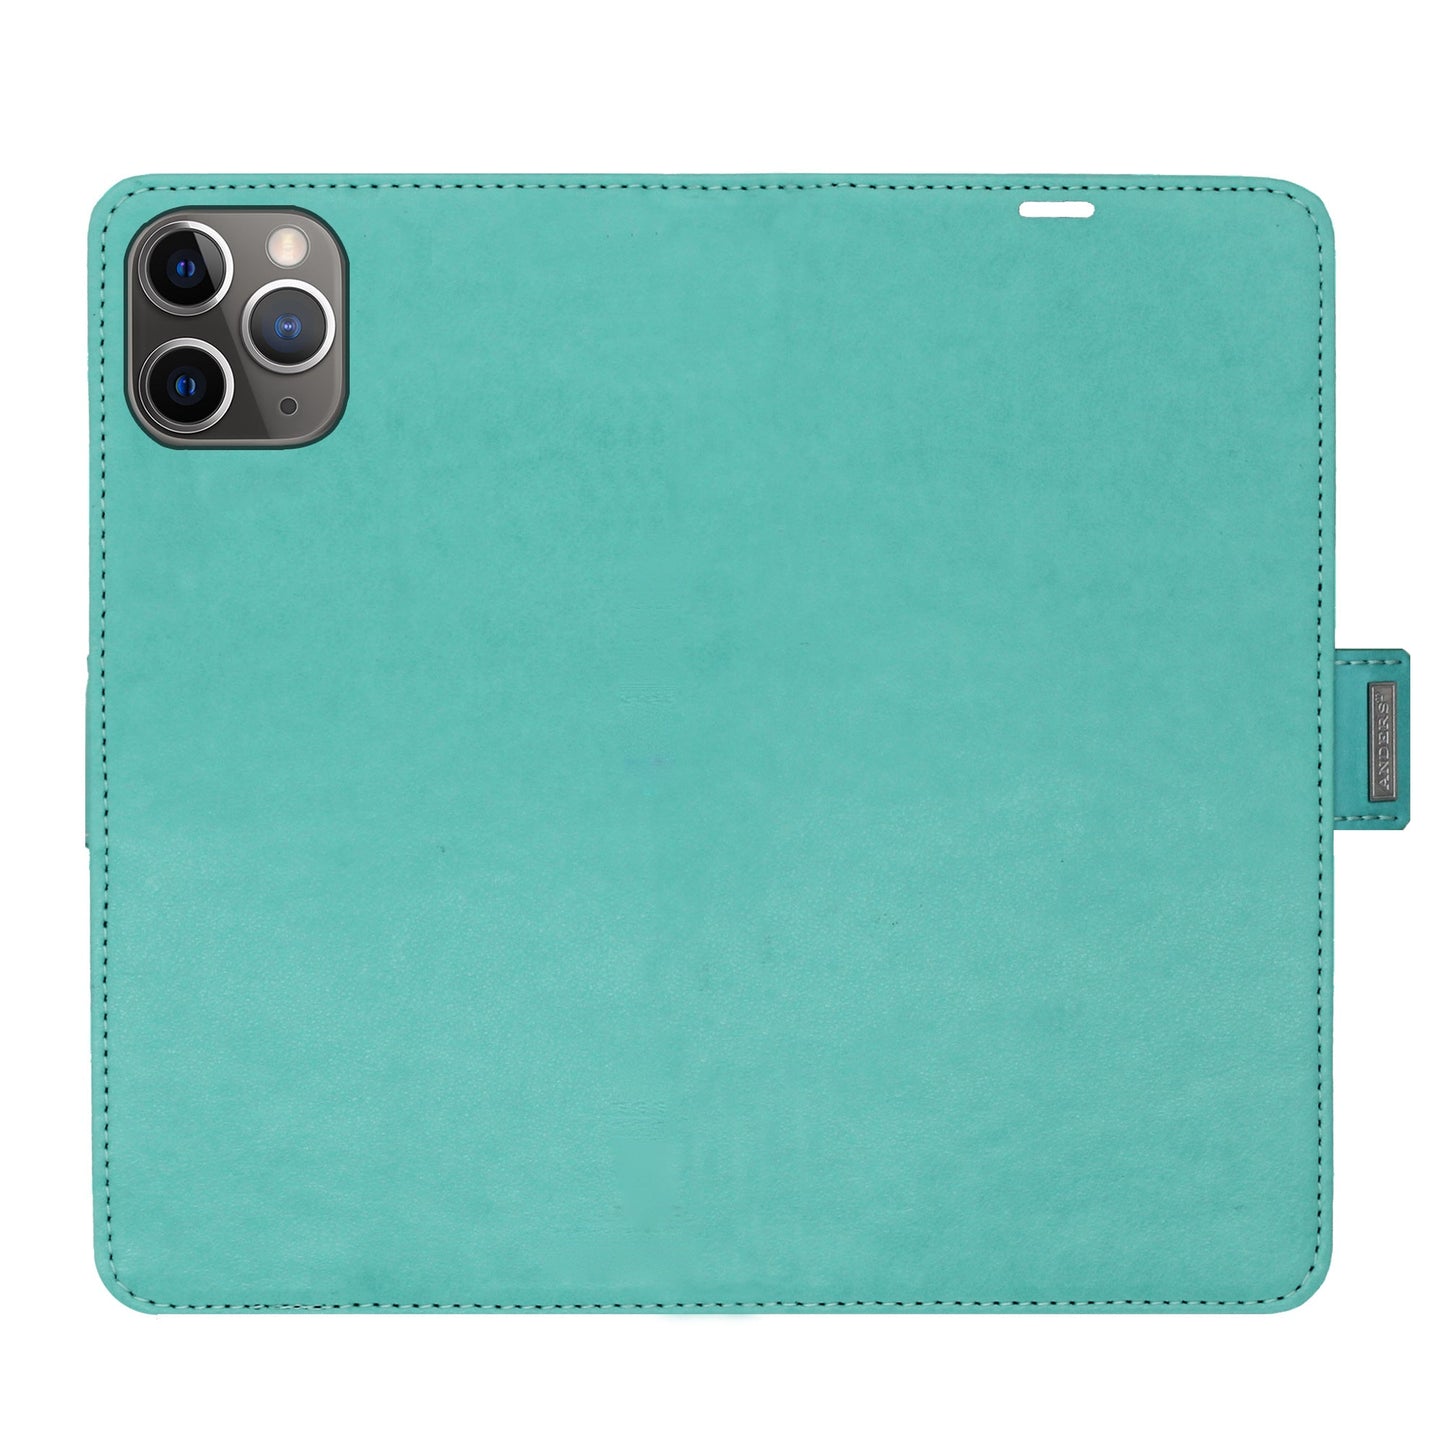 Uni Mint Victor Case for iPhone 11 Pro